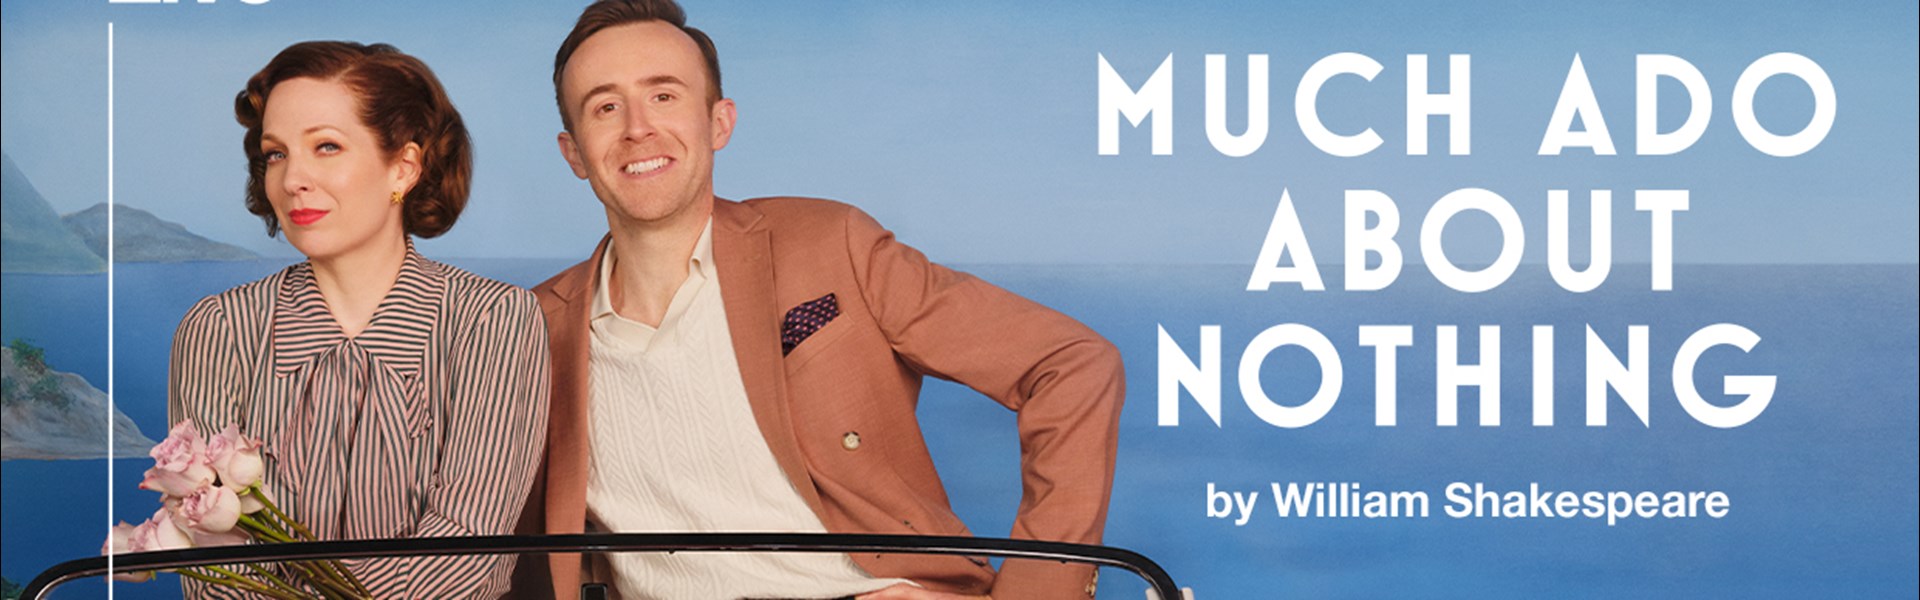 NTLive: Much Ado About Nothing (Live Screening)